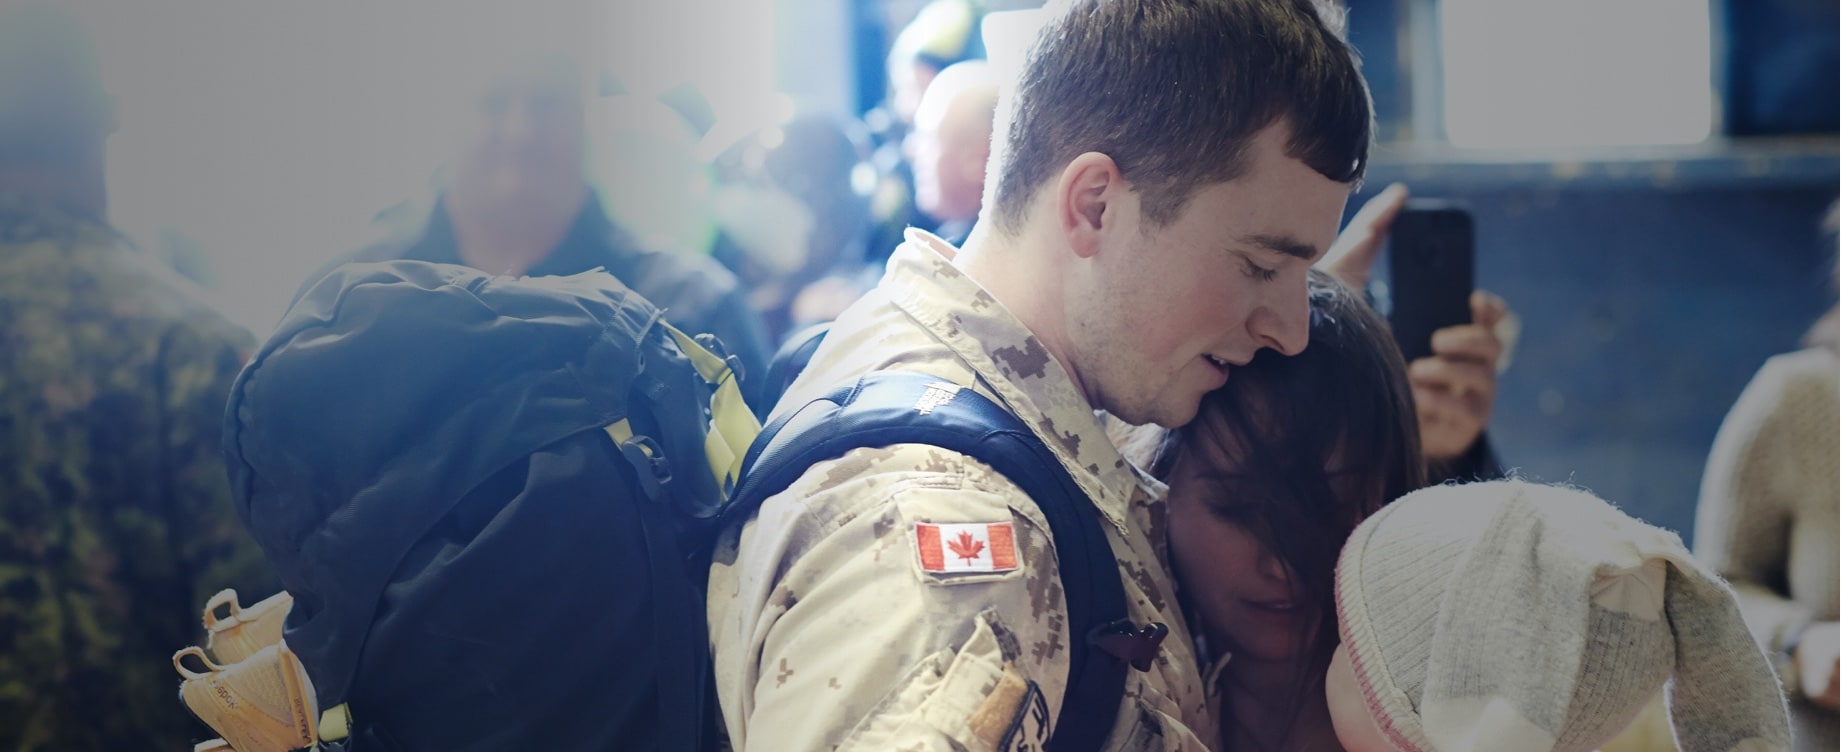 Male soldier reunites with young child on return from deployment